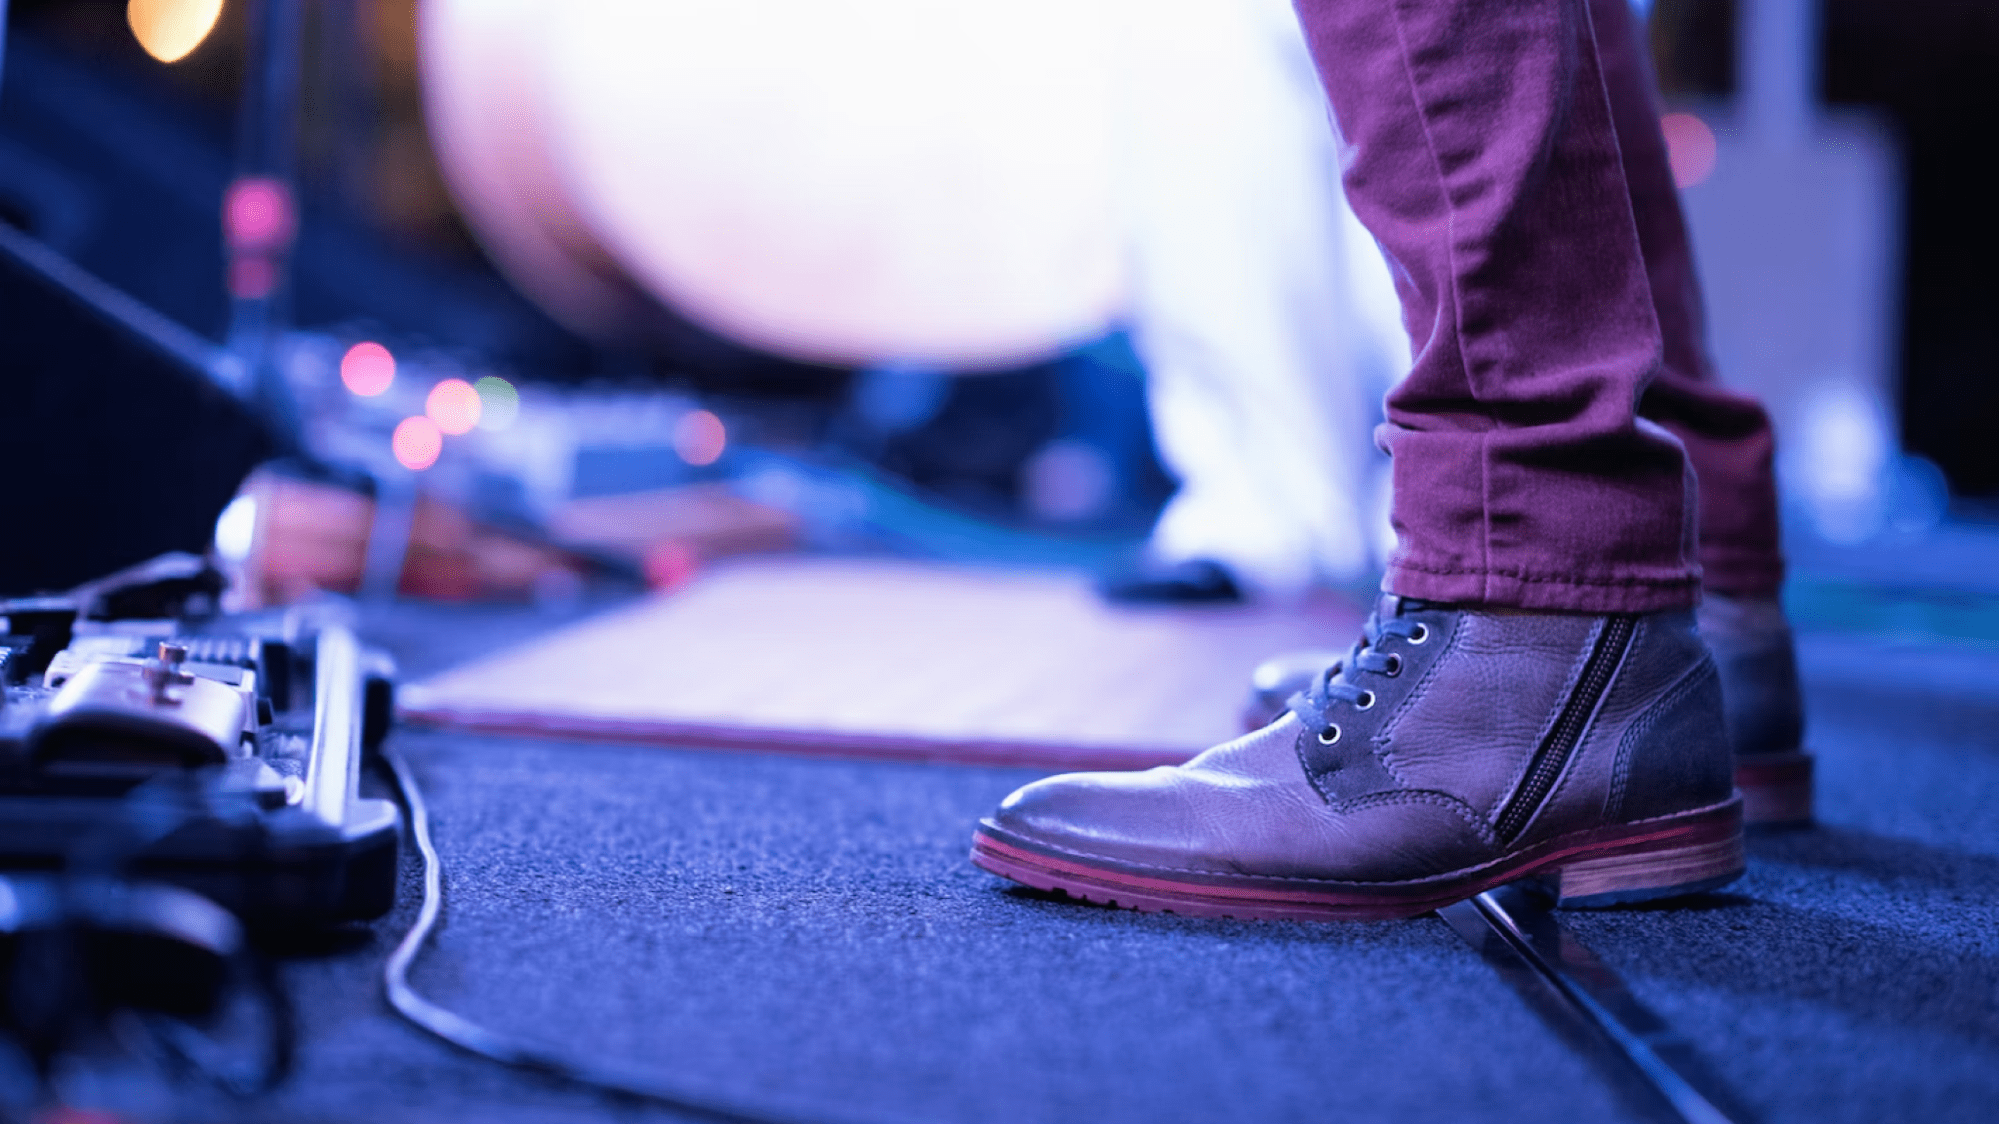 Member of a band's legs and boots on stage